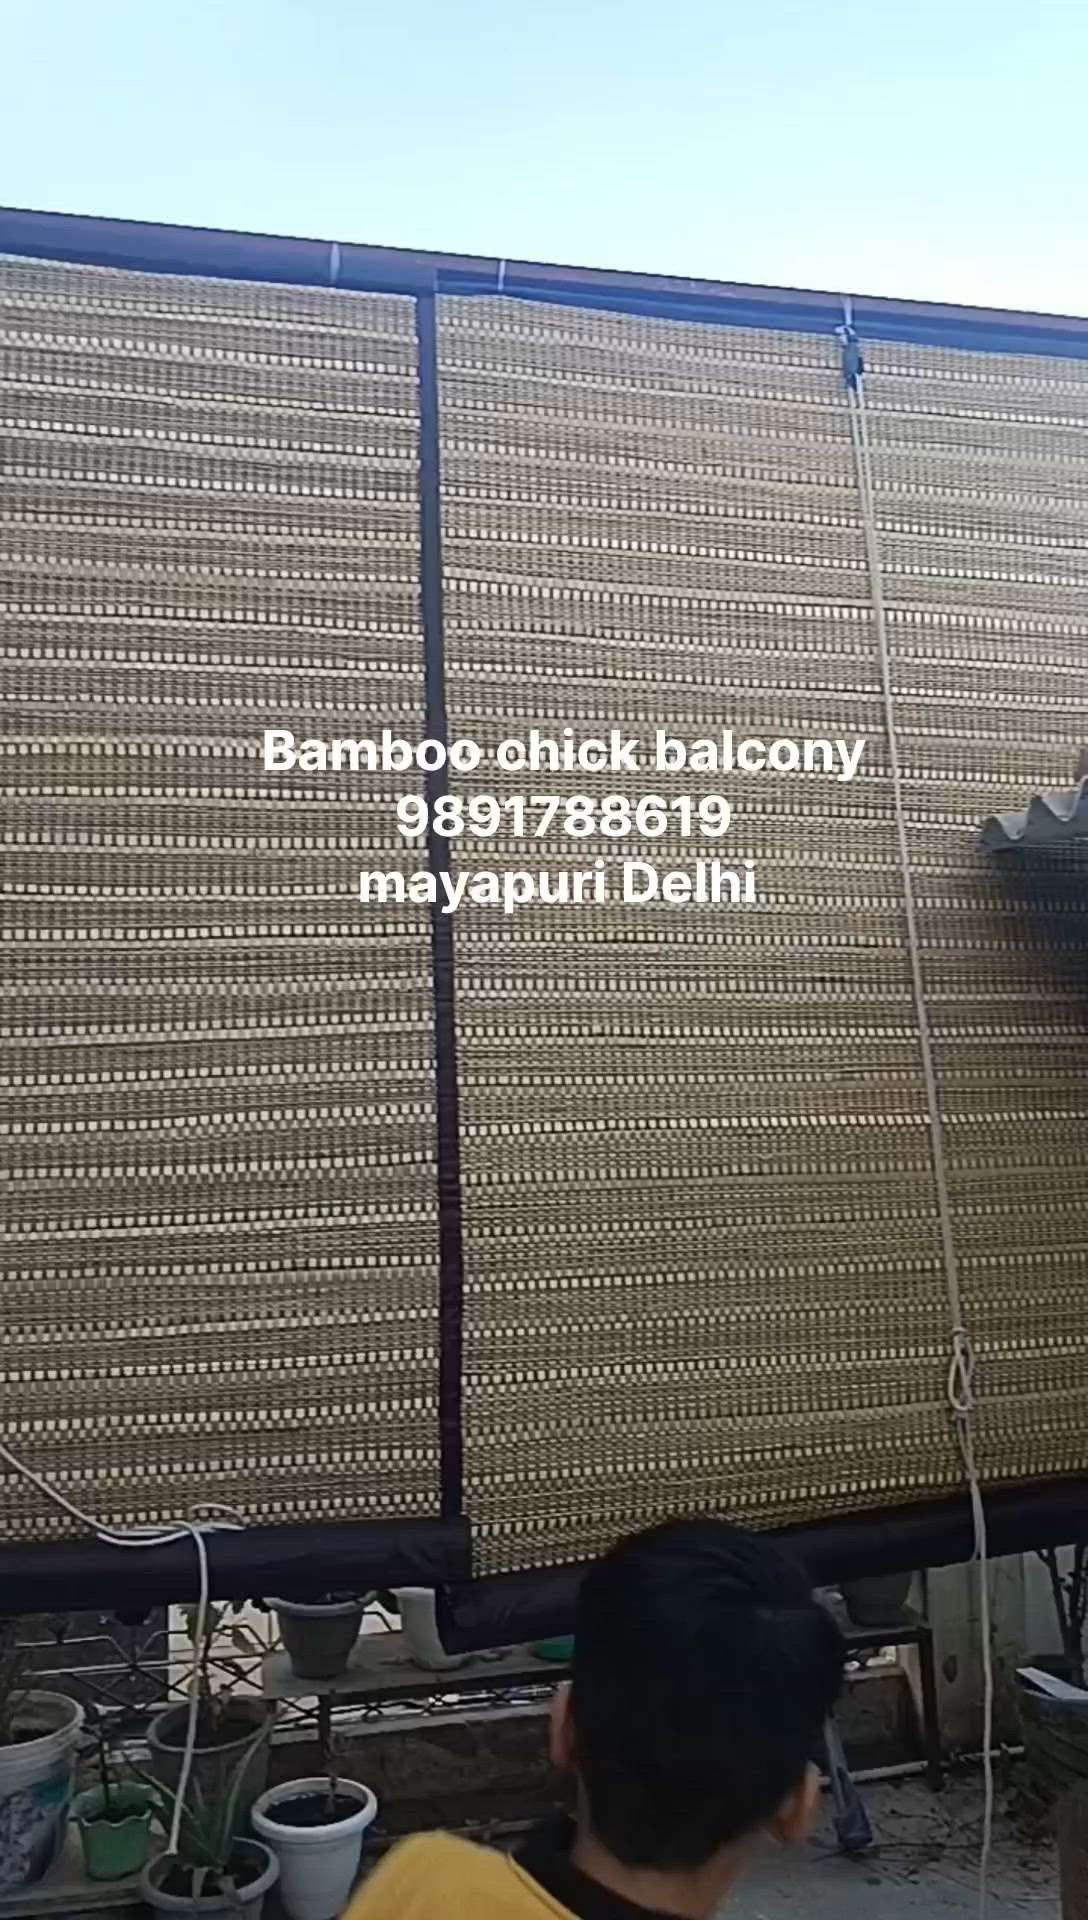 How to Restring Bamboo Curtain / Restring Bamboo Chick Blinder / Change Rope on a Roll Up Blind
9891788619  mayapuri Delhi